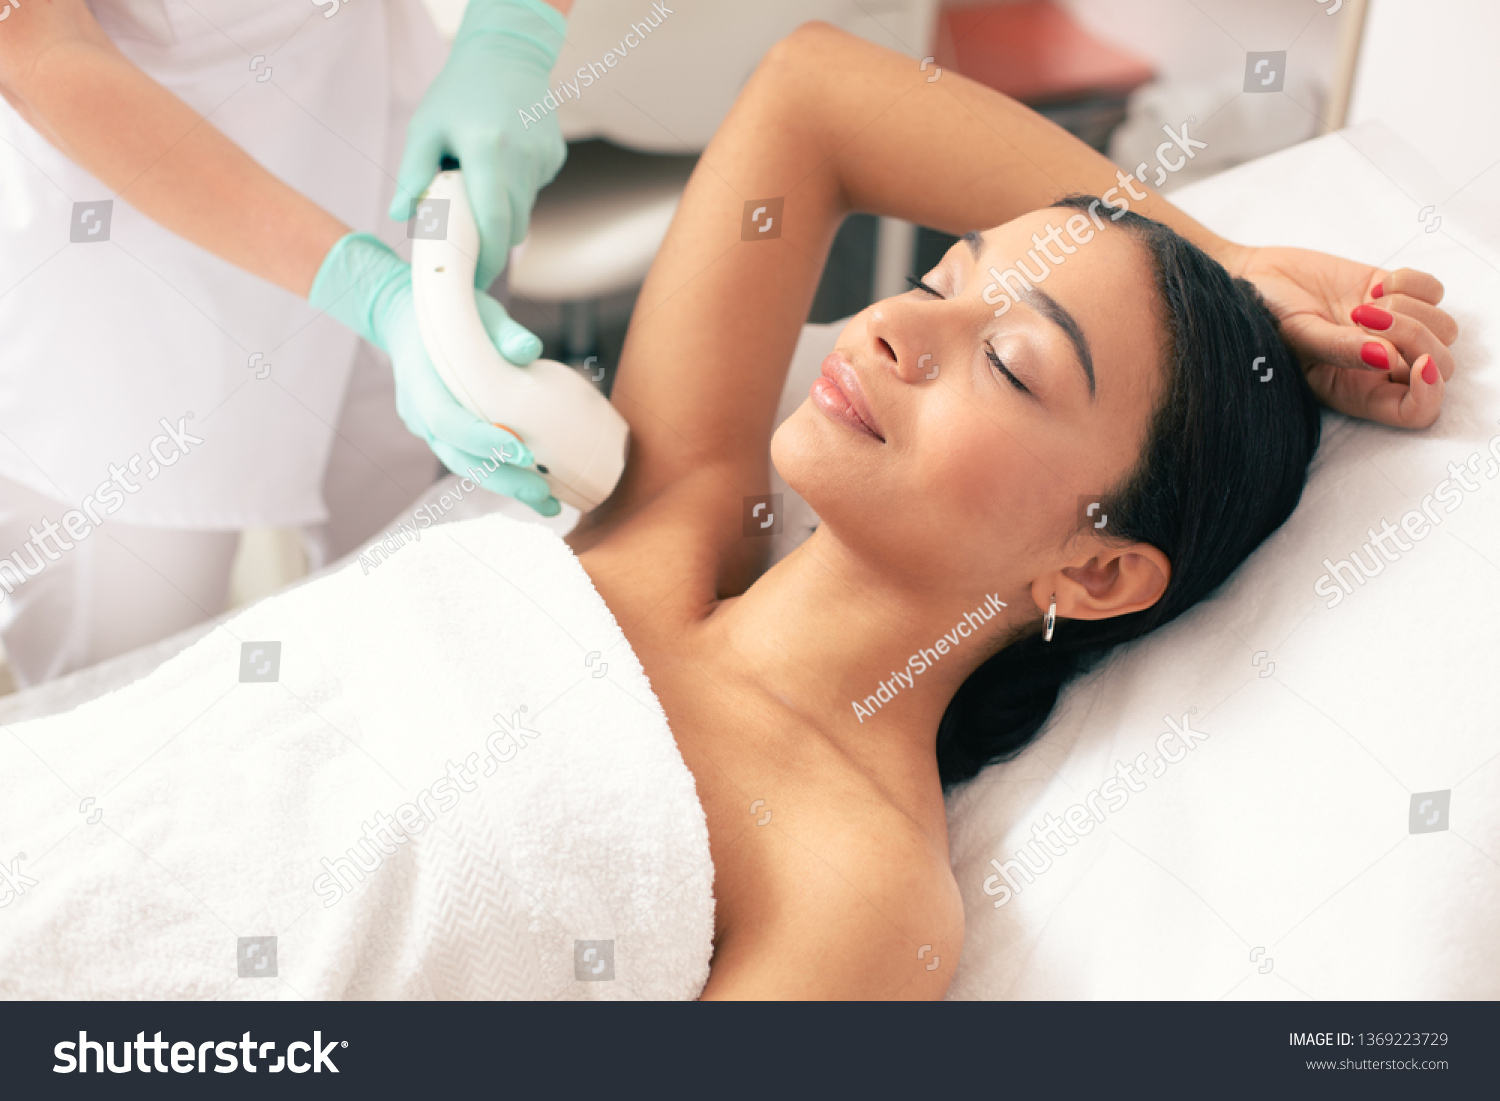 Calm young woman lying with closed eyes and putting on arm up while having laser hair removal procedure on it #1369223729